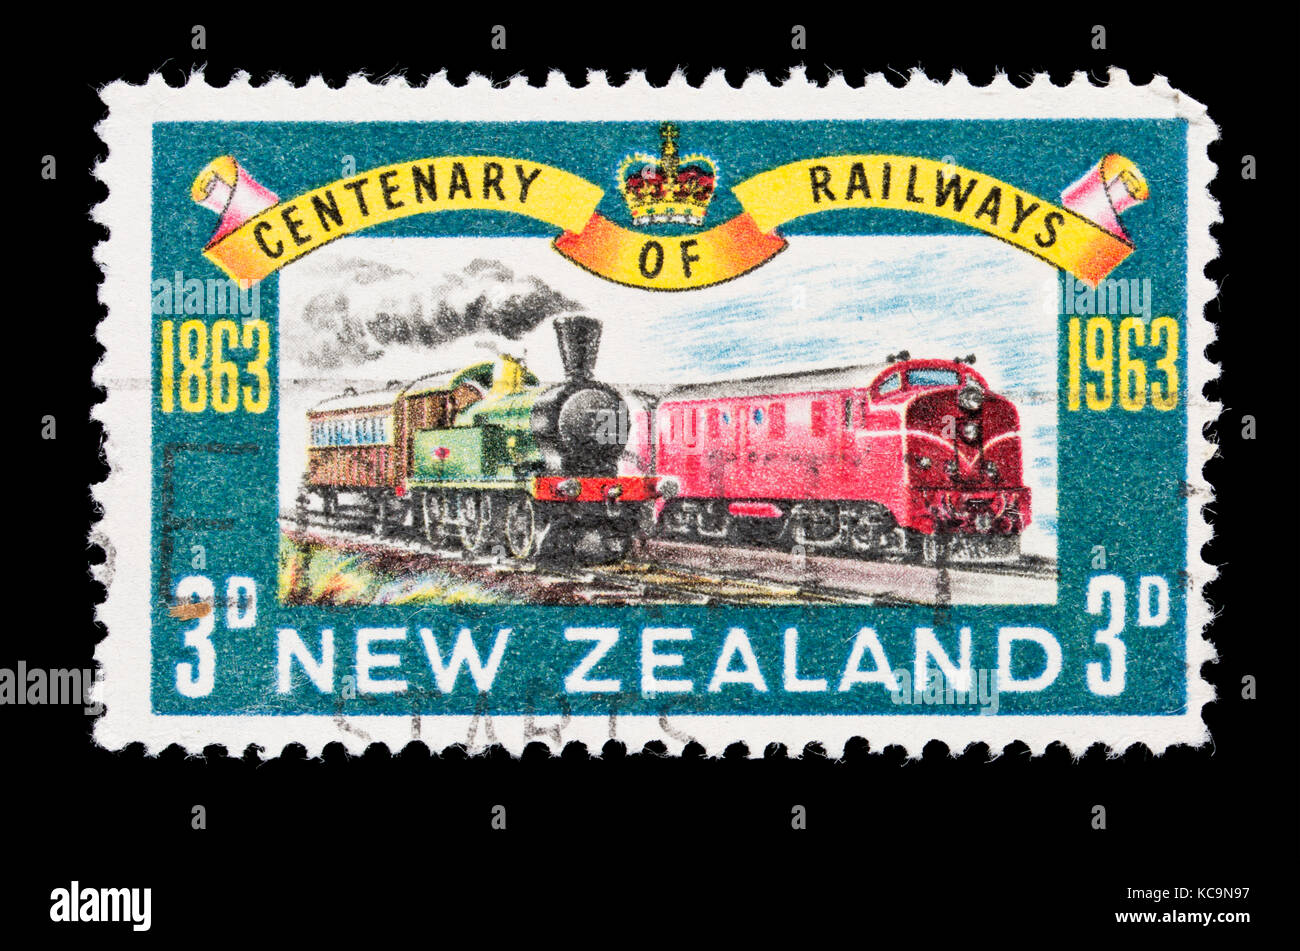 Postage stamp from New Zealand depicting old and new locomotives, for the centennial of New Zealand railroads. Stock Photo